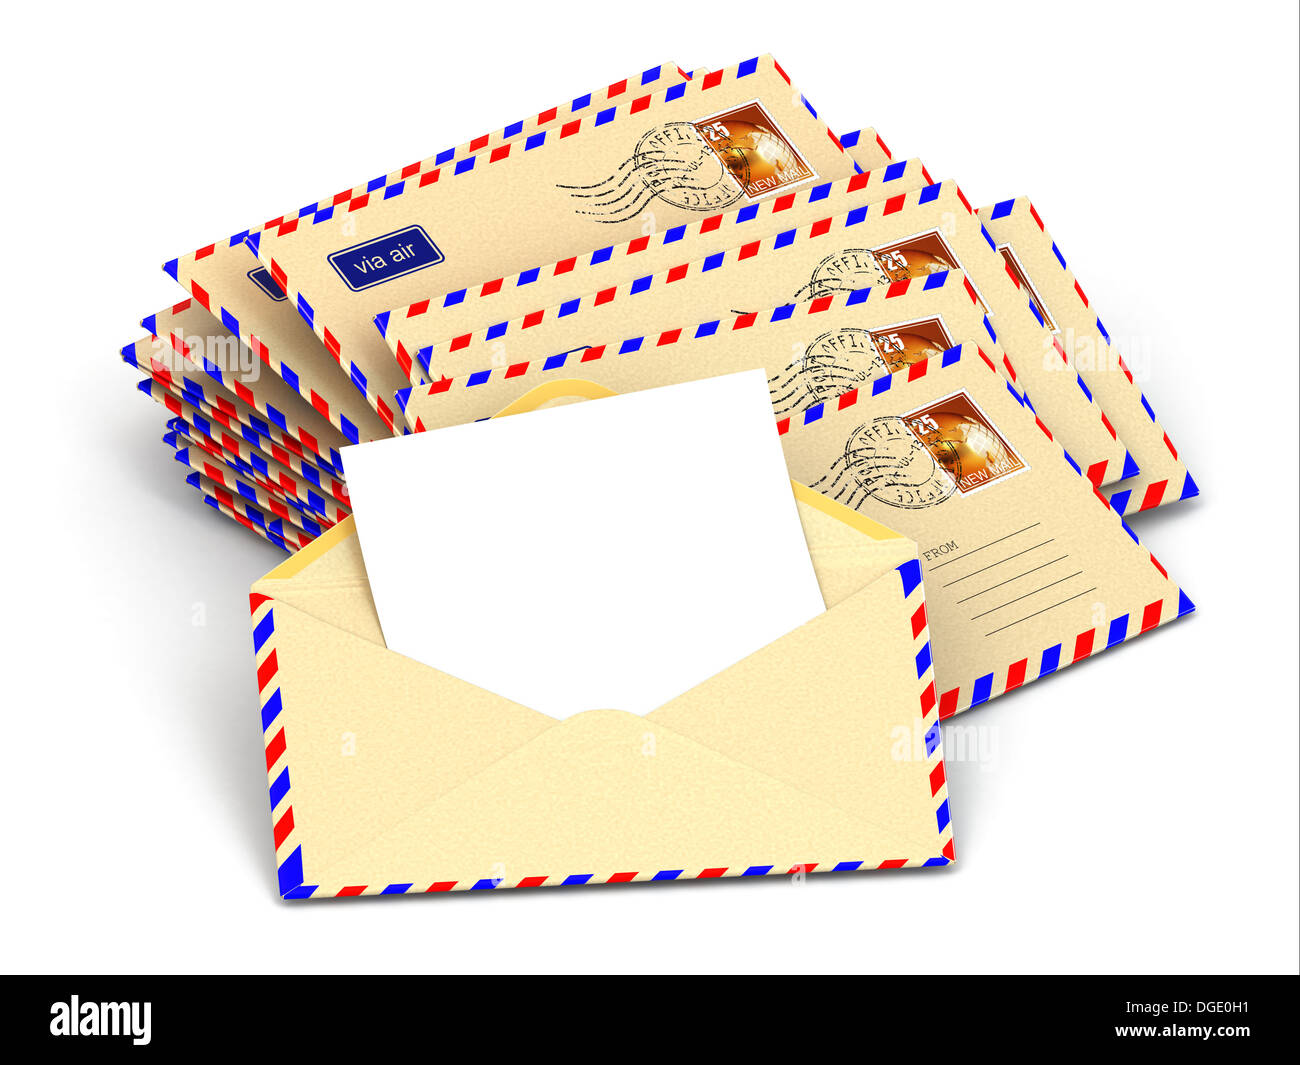 Mail. Stack of envelopes and empty letters. 3d Stock Photo